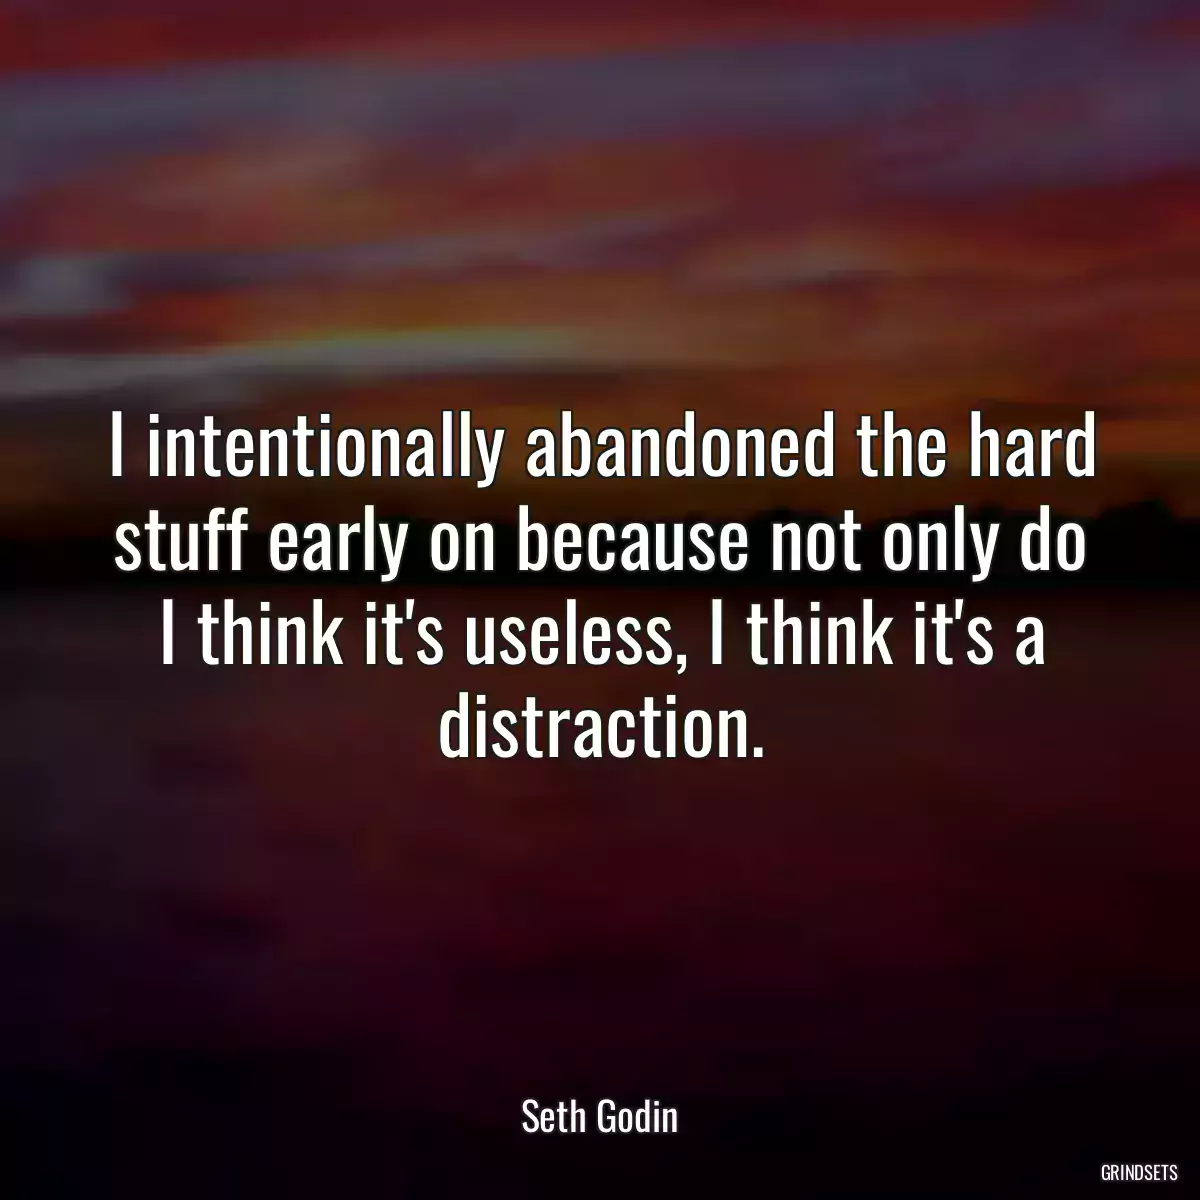 I intentionally abandoned the hard stuff early on because not only do I think it\'s useless, I think it\'s a distraction.